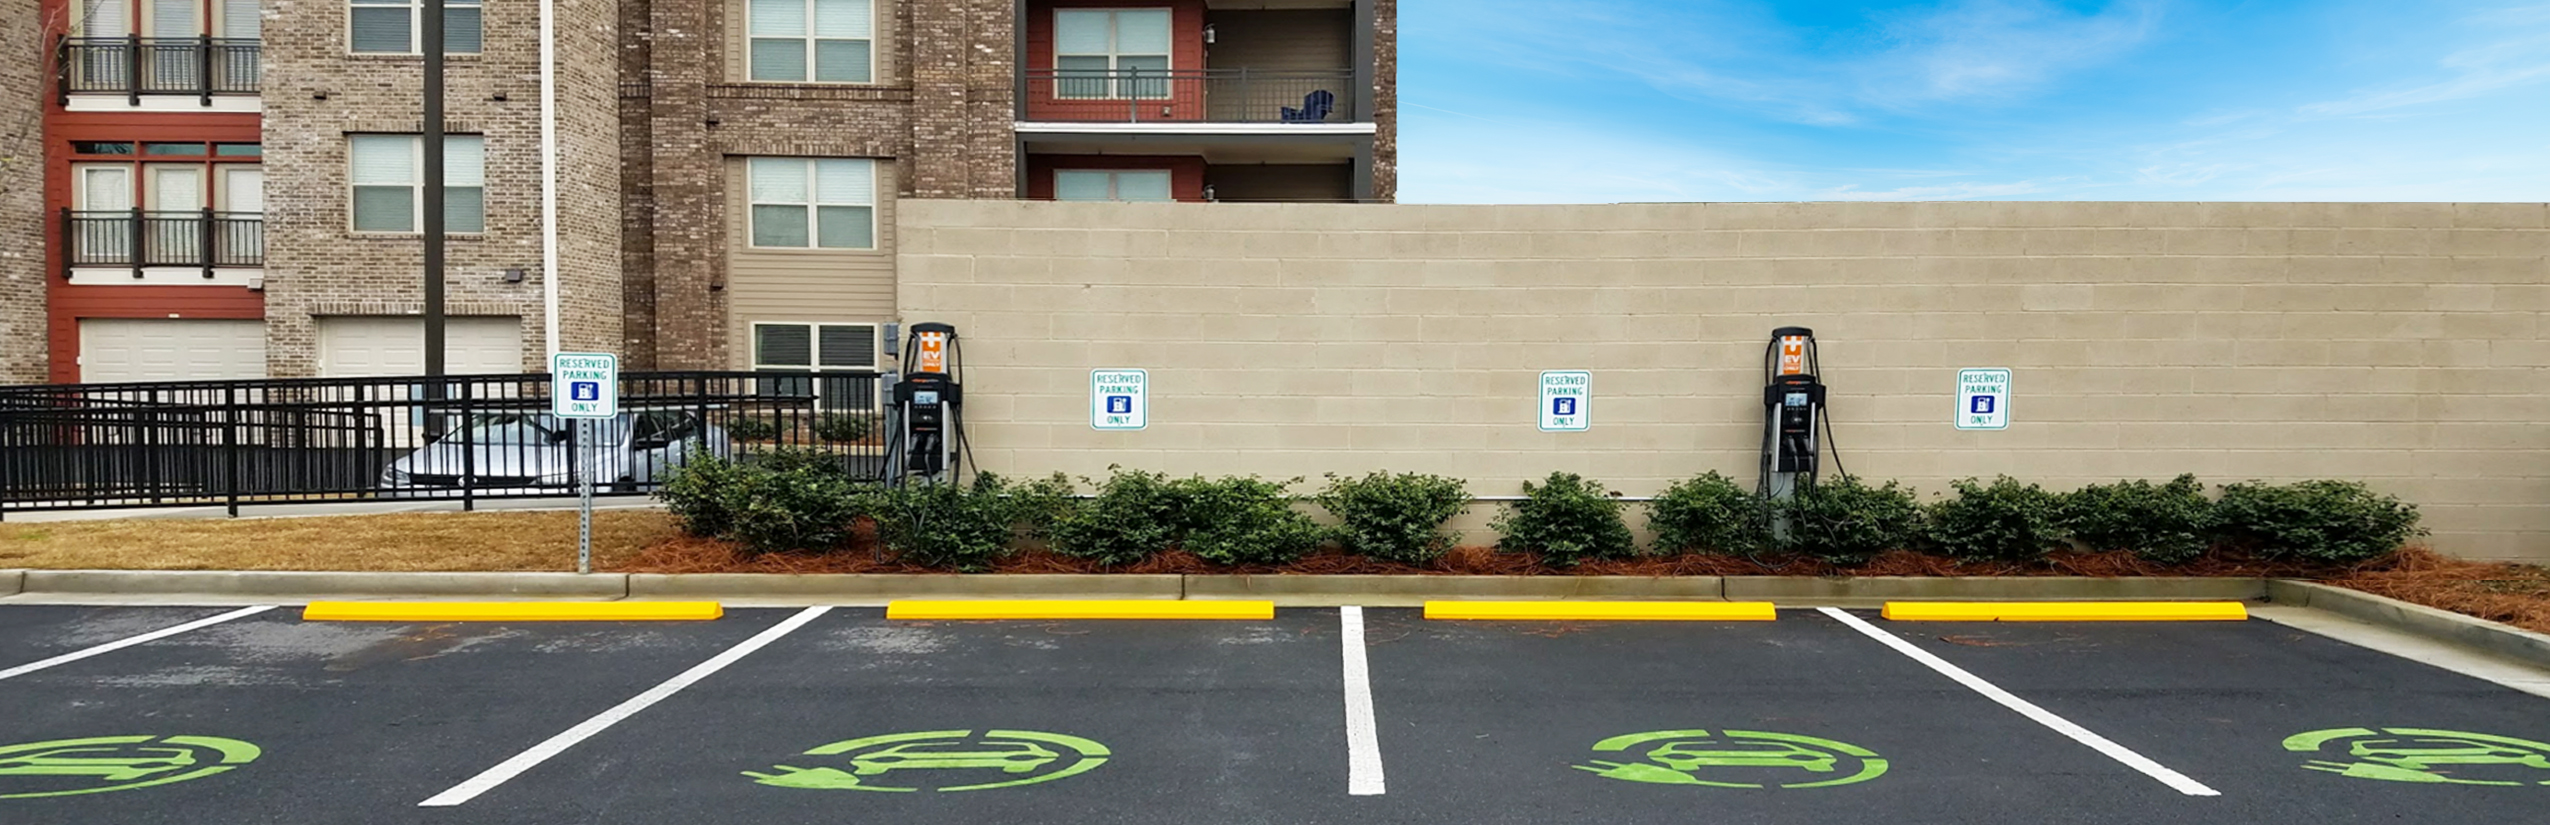 ChargePoint_Background_Image.jpg